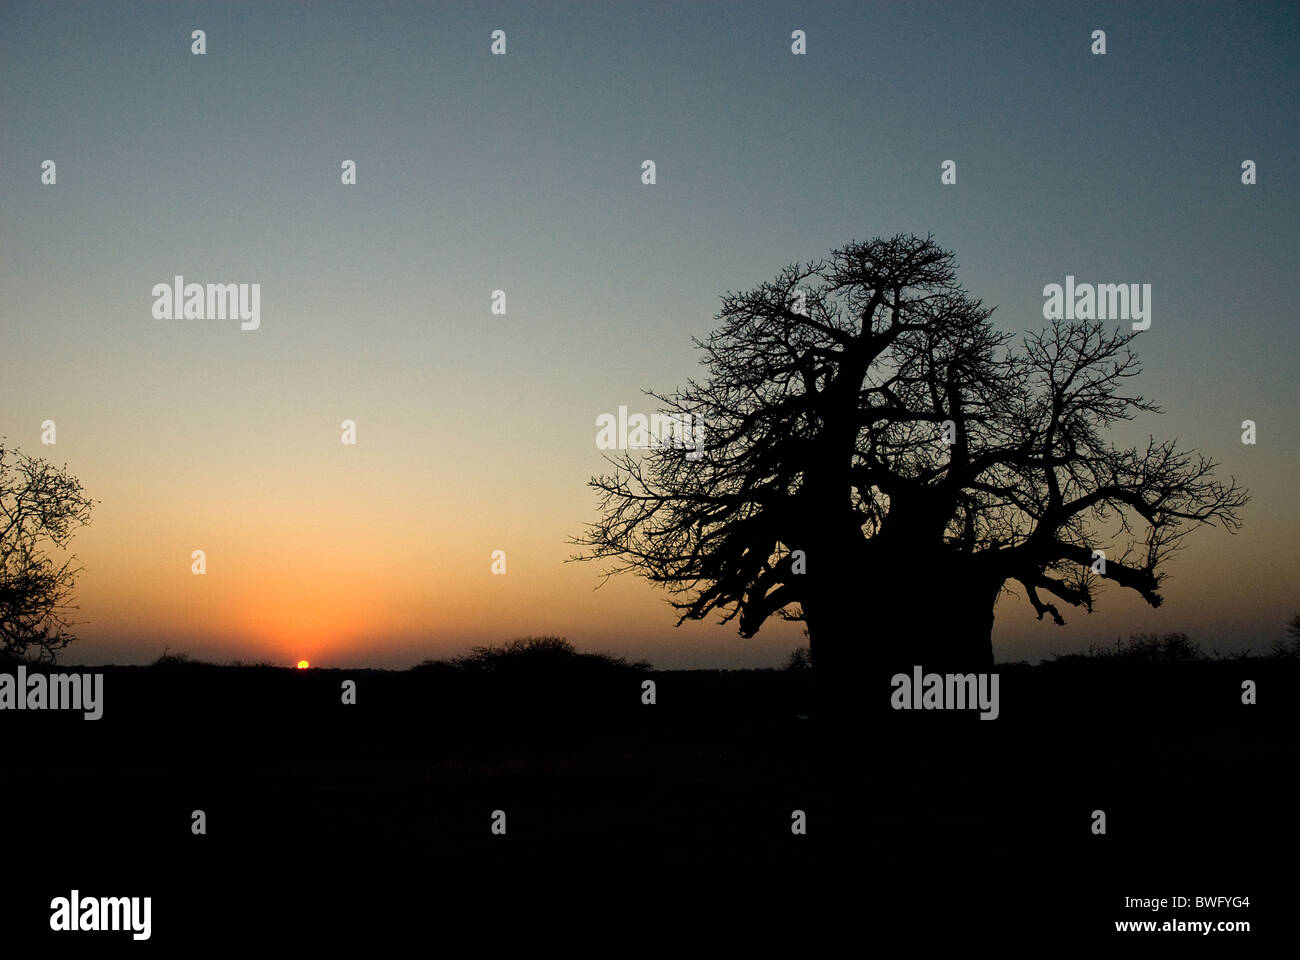 A baobab tree Adansonia digitata is silhouetted against the morning sunrise in the Timbavati, Limpopo Province, South Africa. Stock Photo